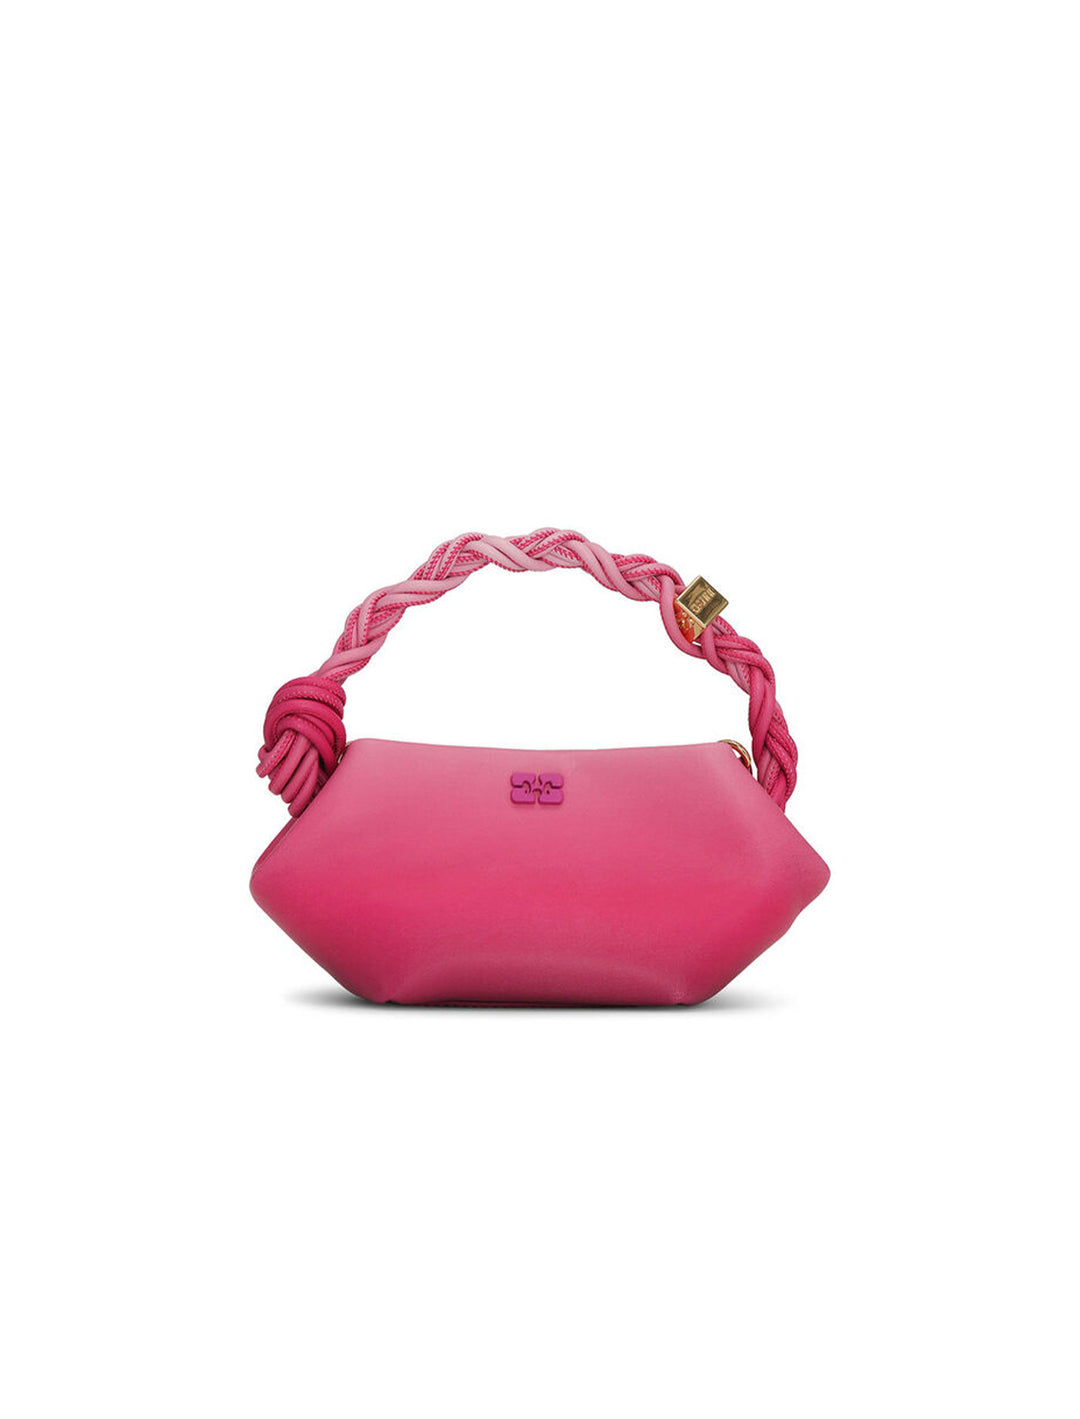 Front view of GANNI's mini bou bag in gradient pink.